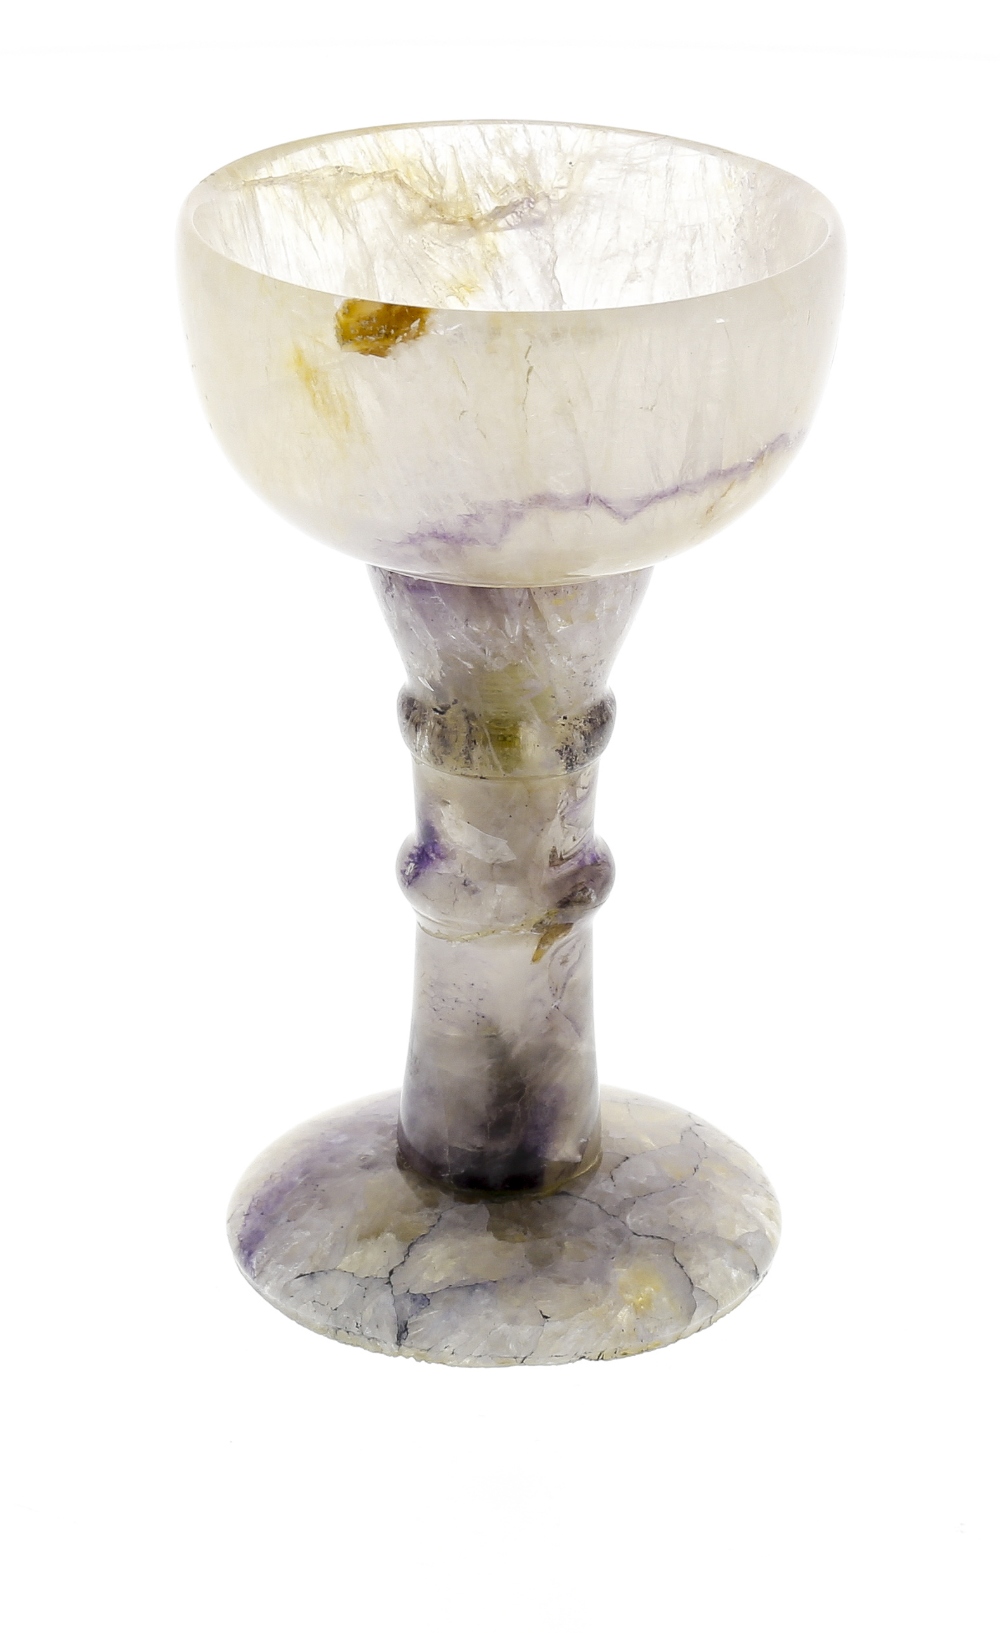 A Blue John goblet The hemispherical bowl with pale lilac veining on a knopped stem and plain